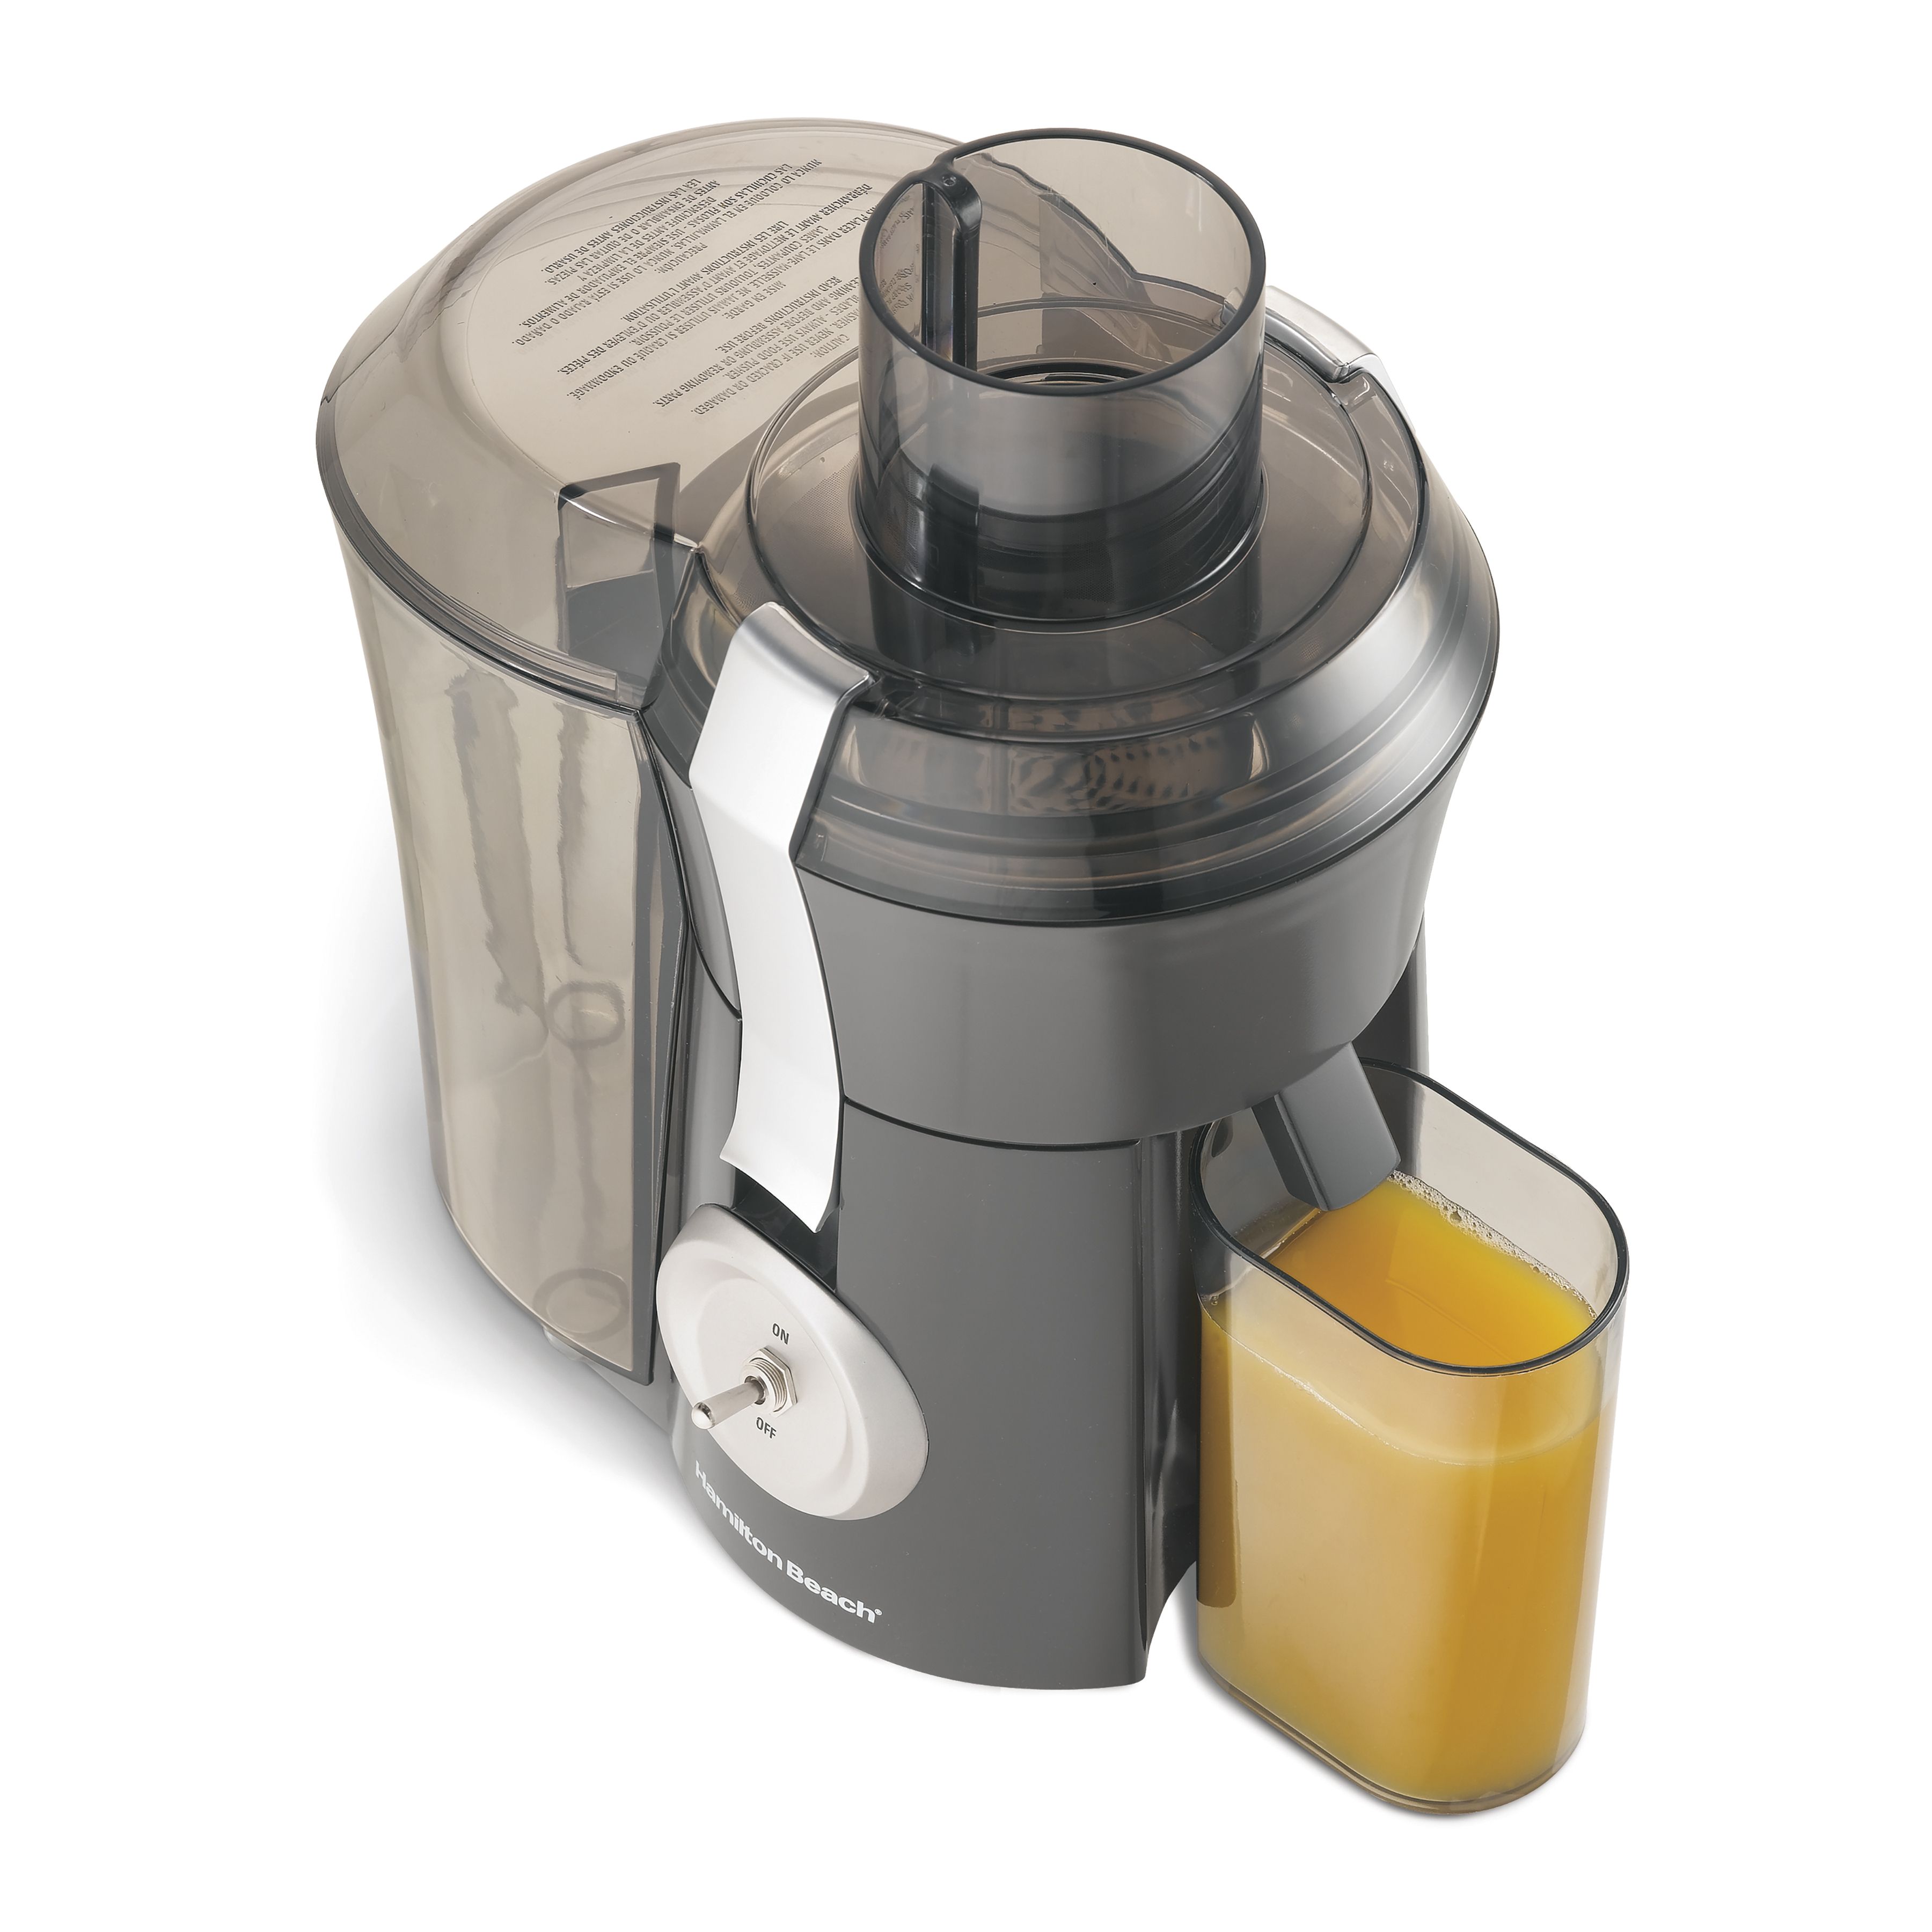 Hamilton Beach Big Mouth Juice & Blend 2-in-1 Juicer and Blender